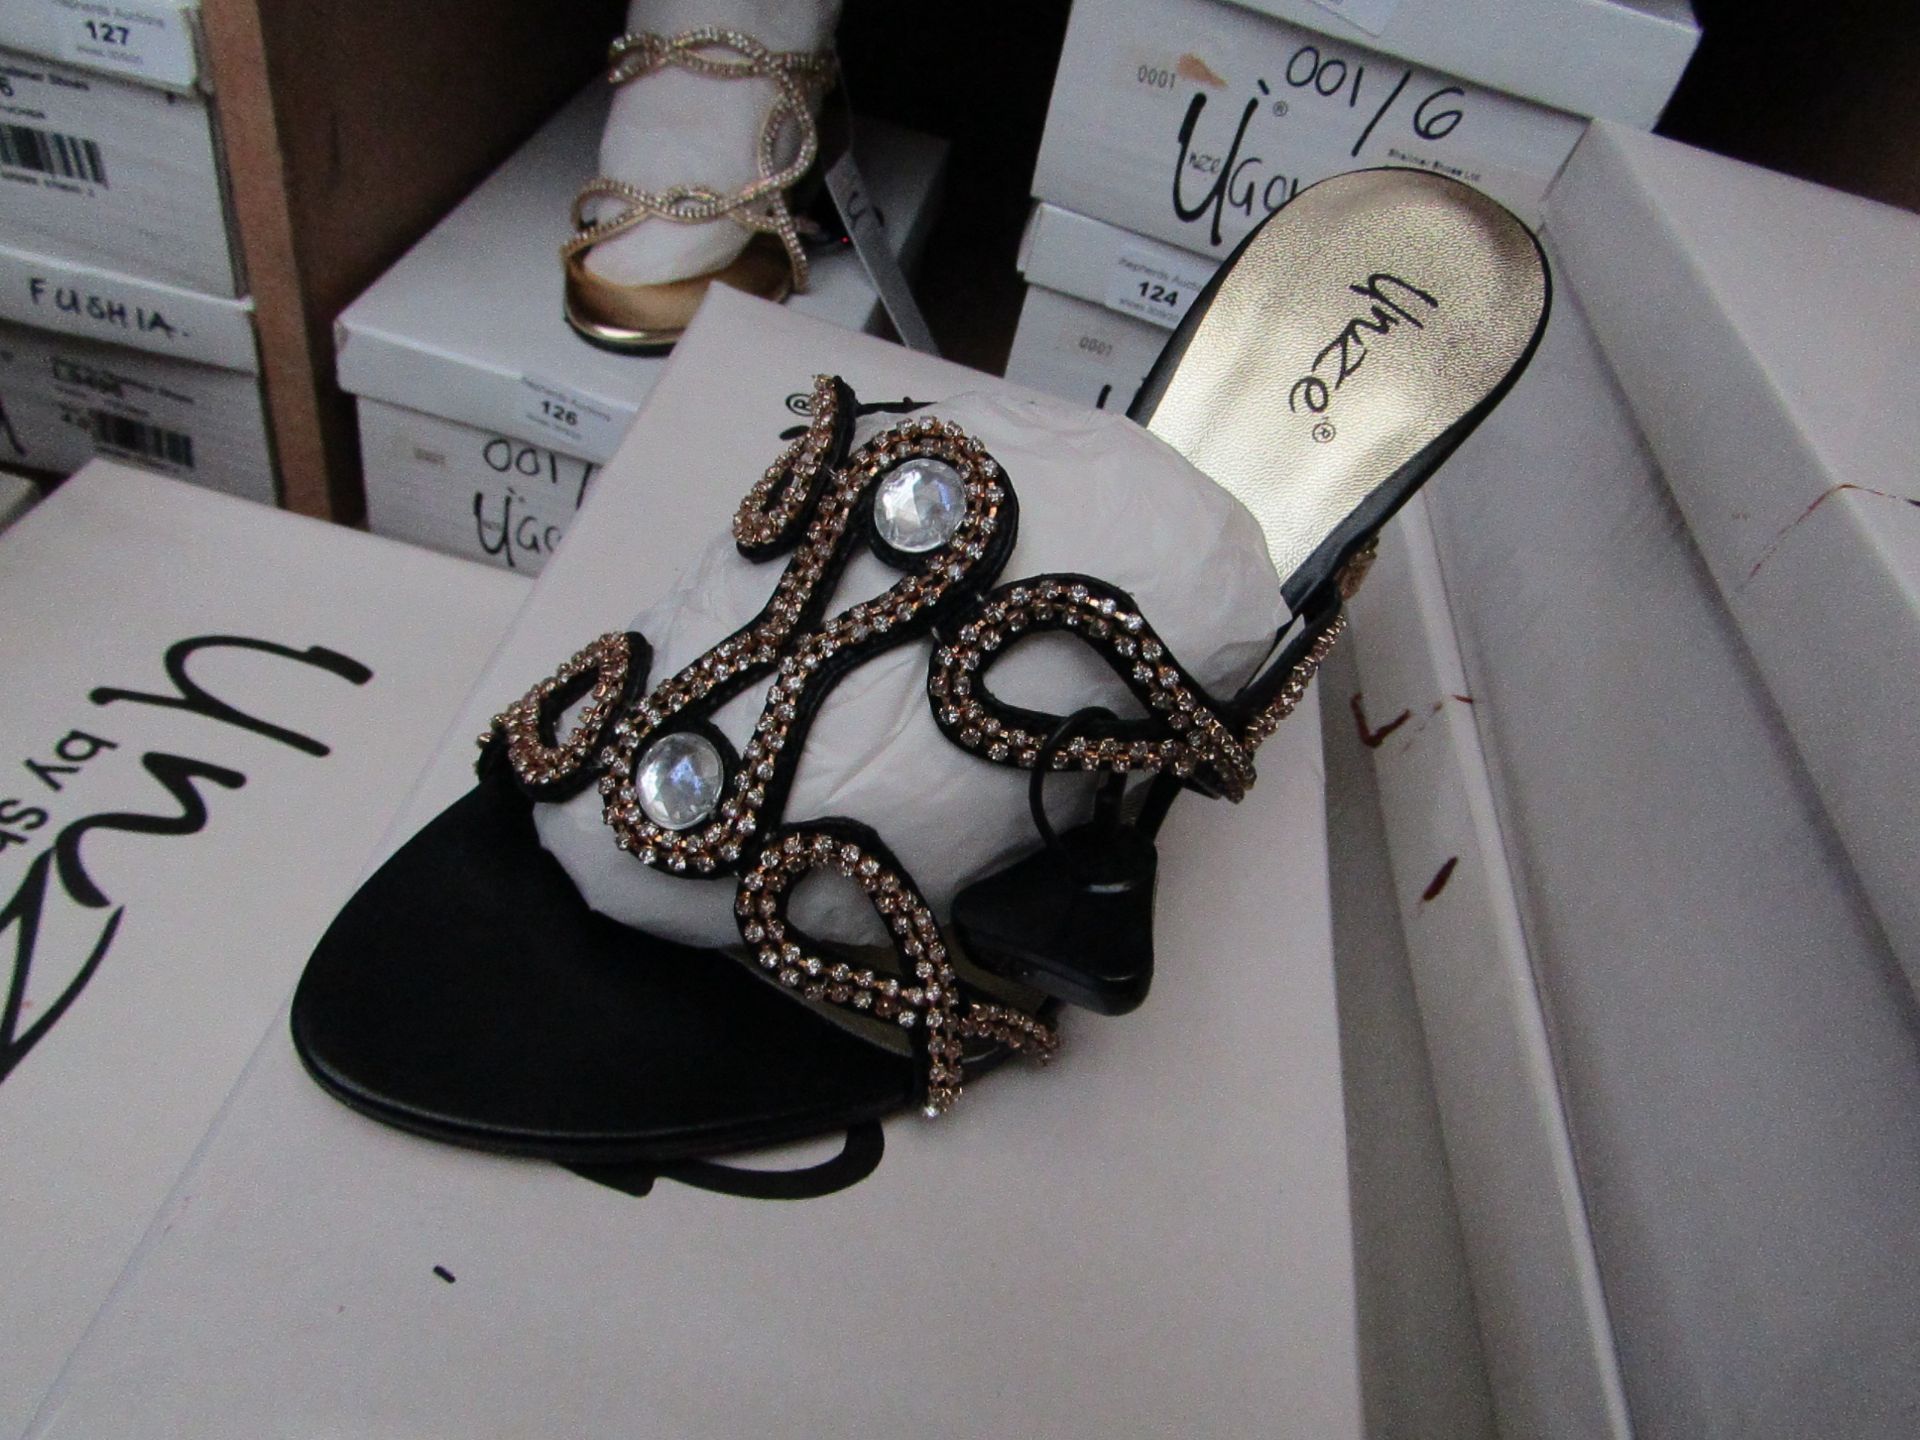 Unze by Shalamar Shoes Ladies Black & Embellished Shoes size 7 new & boxed see image for design